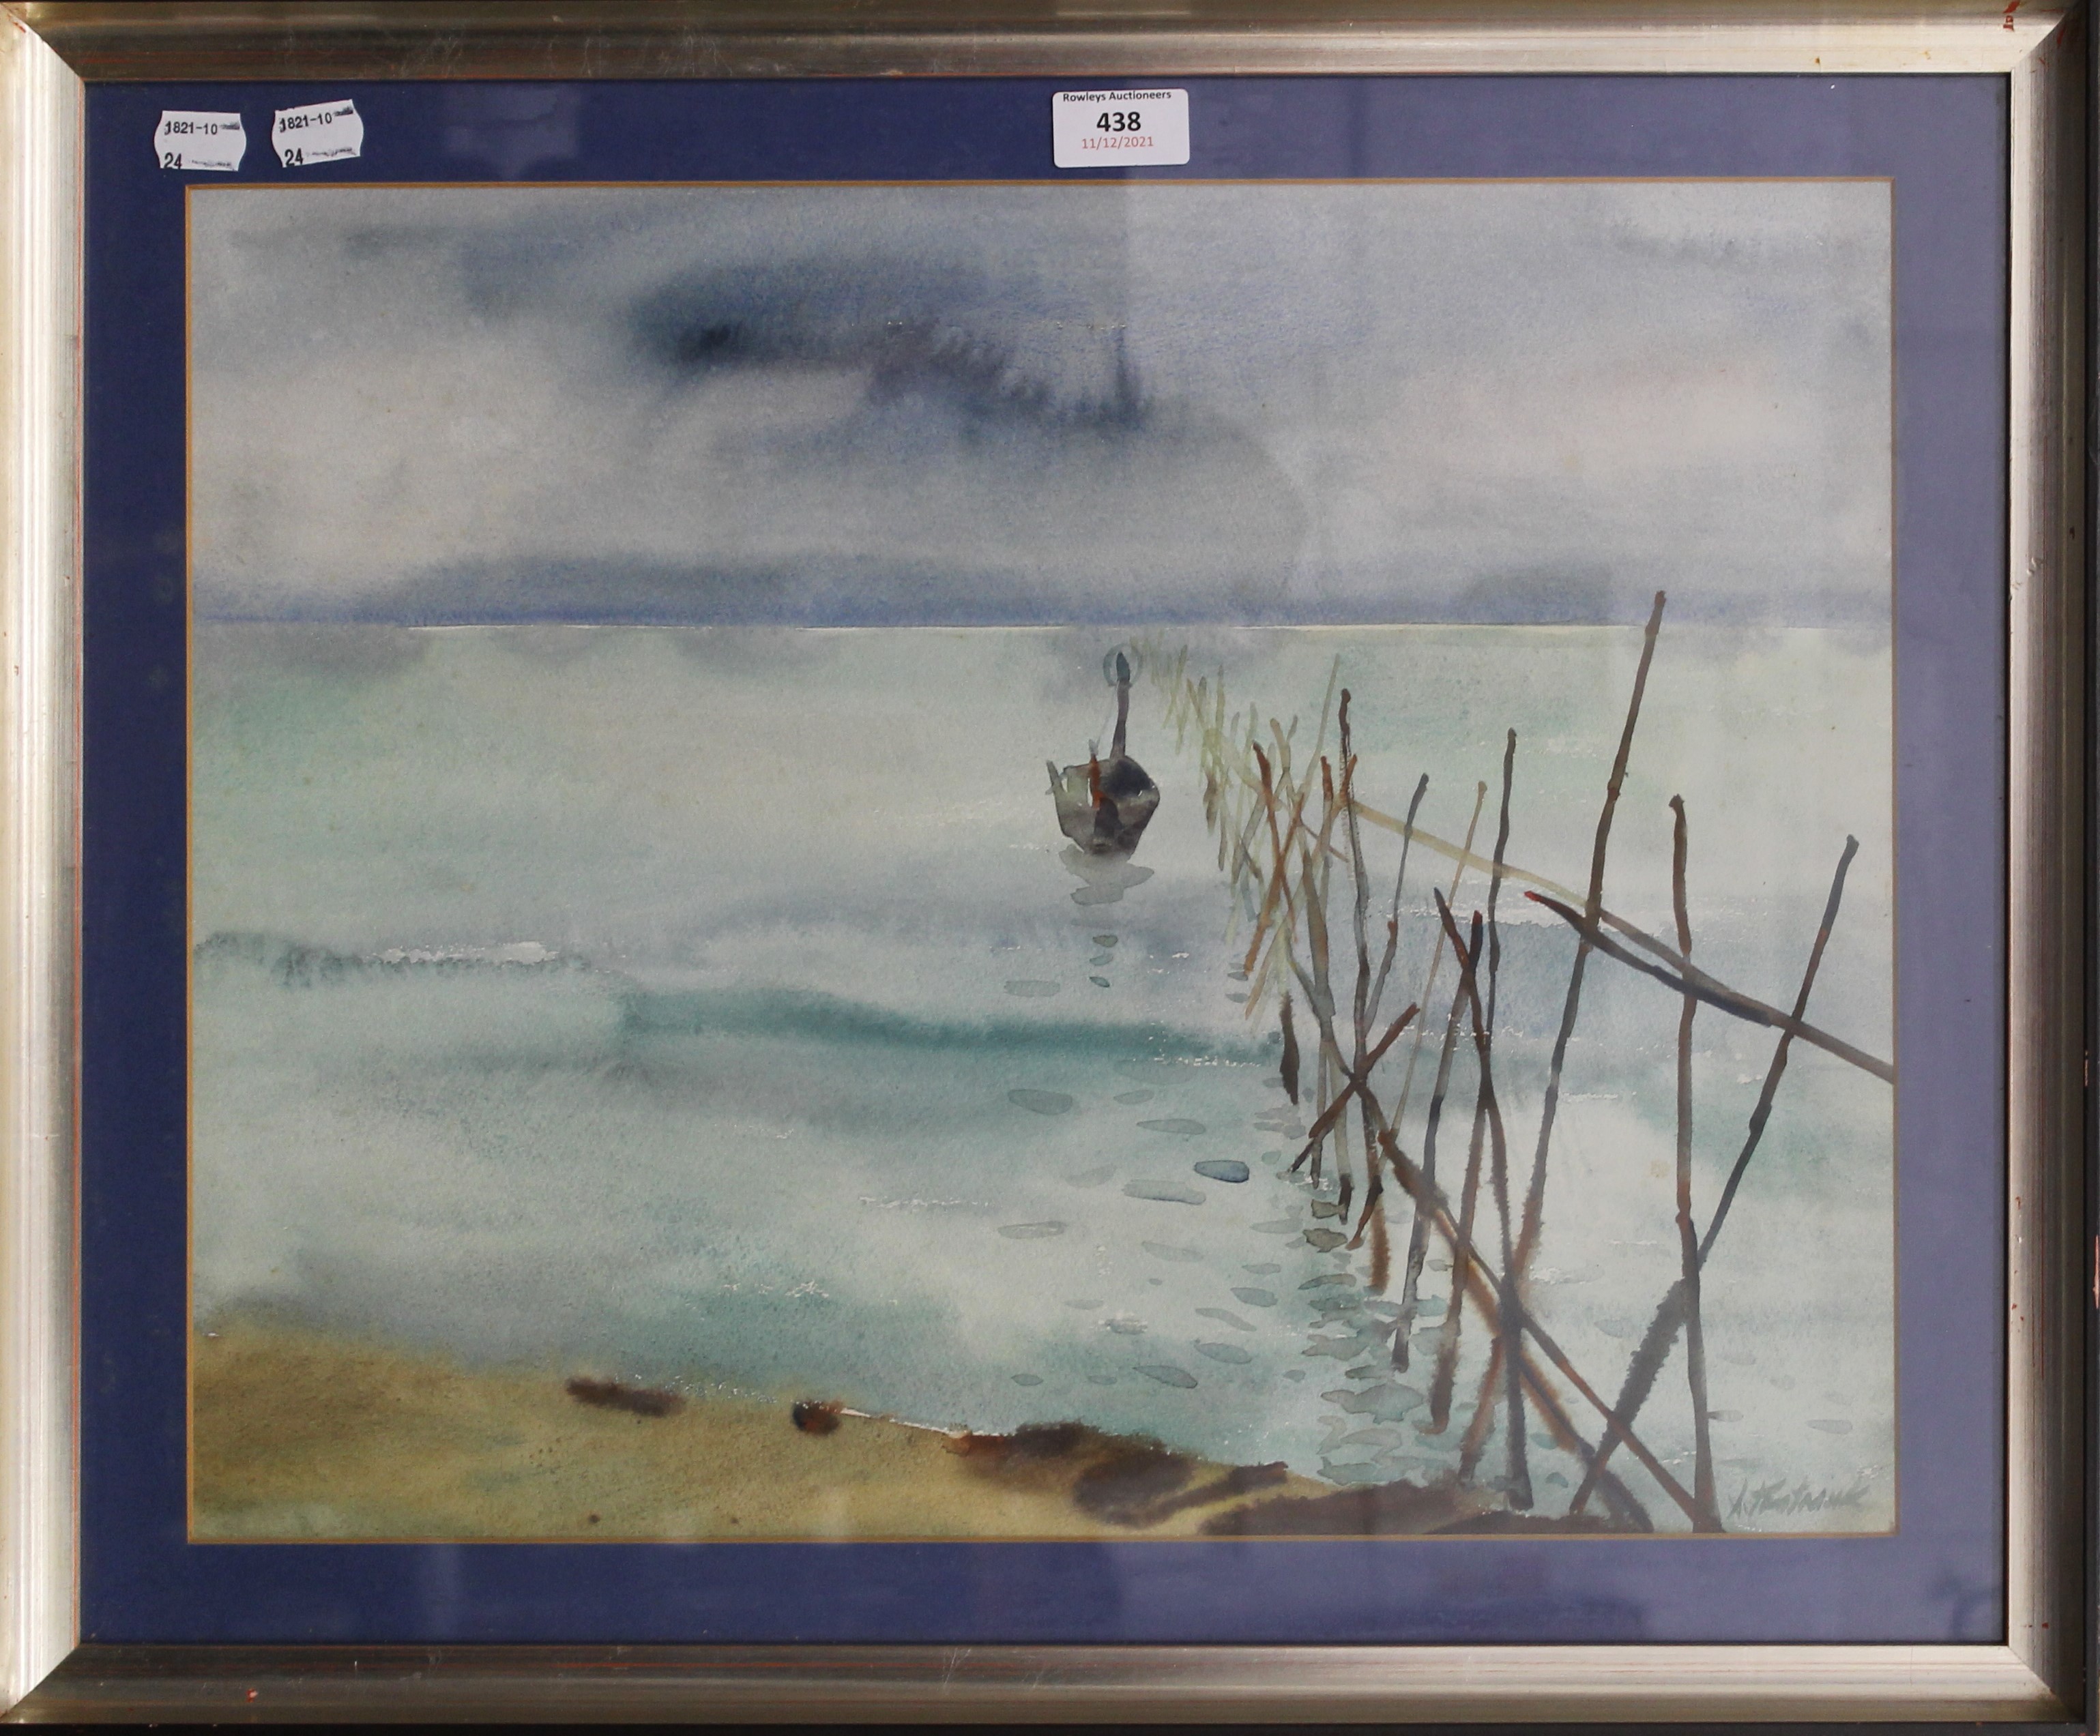 A Seascape, watercolour, indistinctly signed X Tantunk, framed and glazed. 48 x 38 cm. - Image 2 of 3